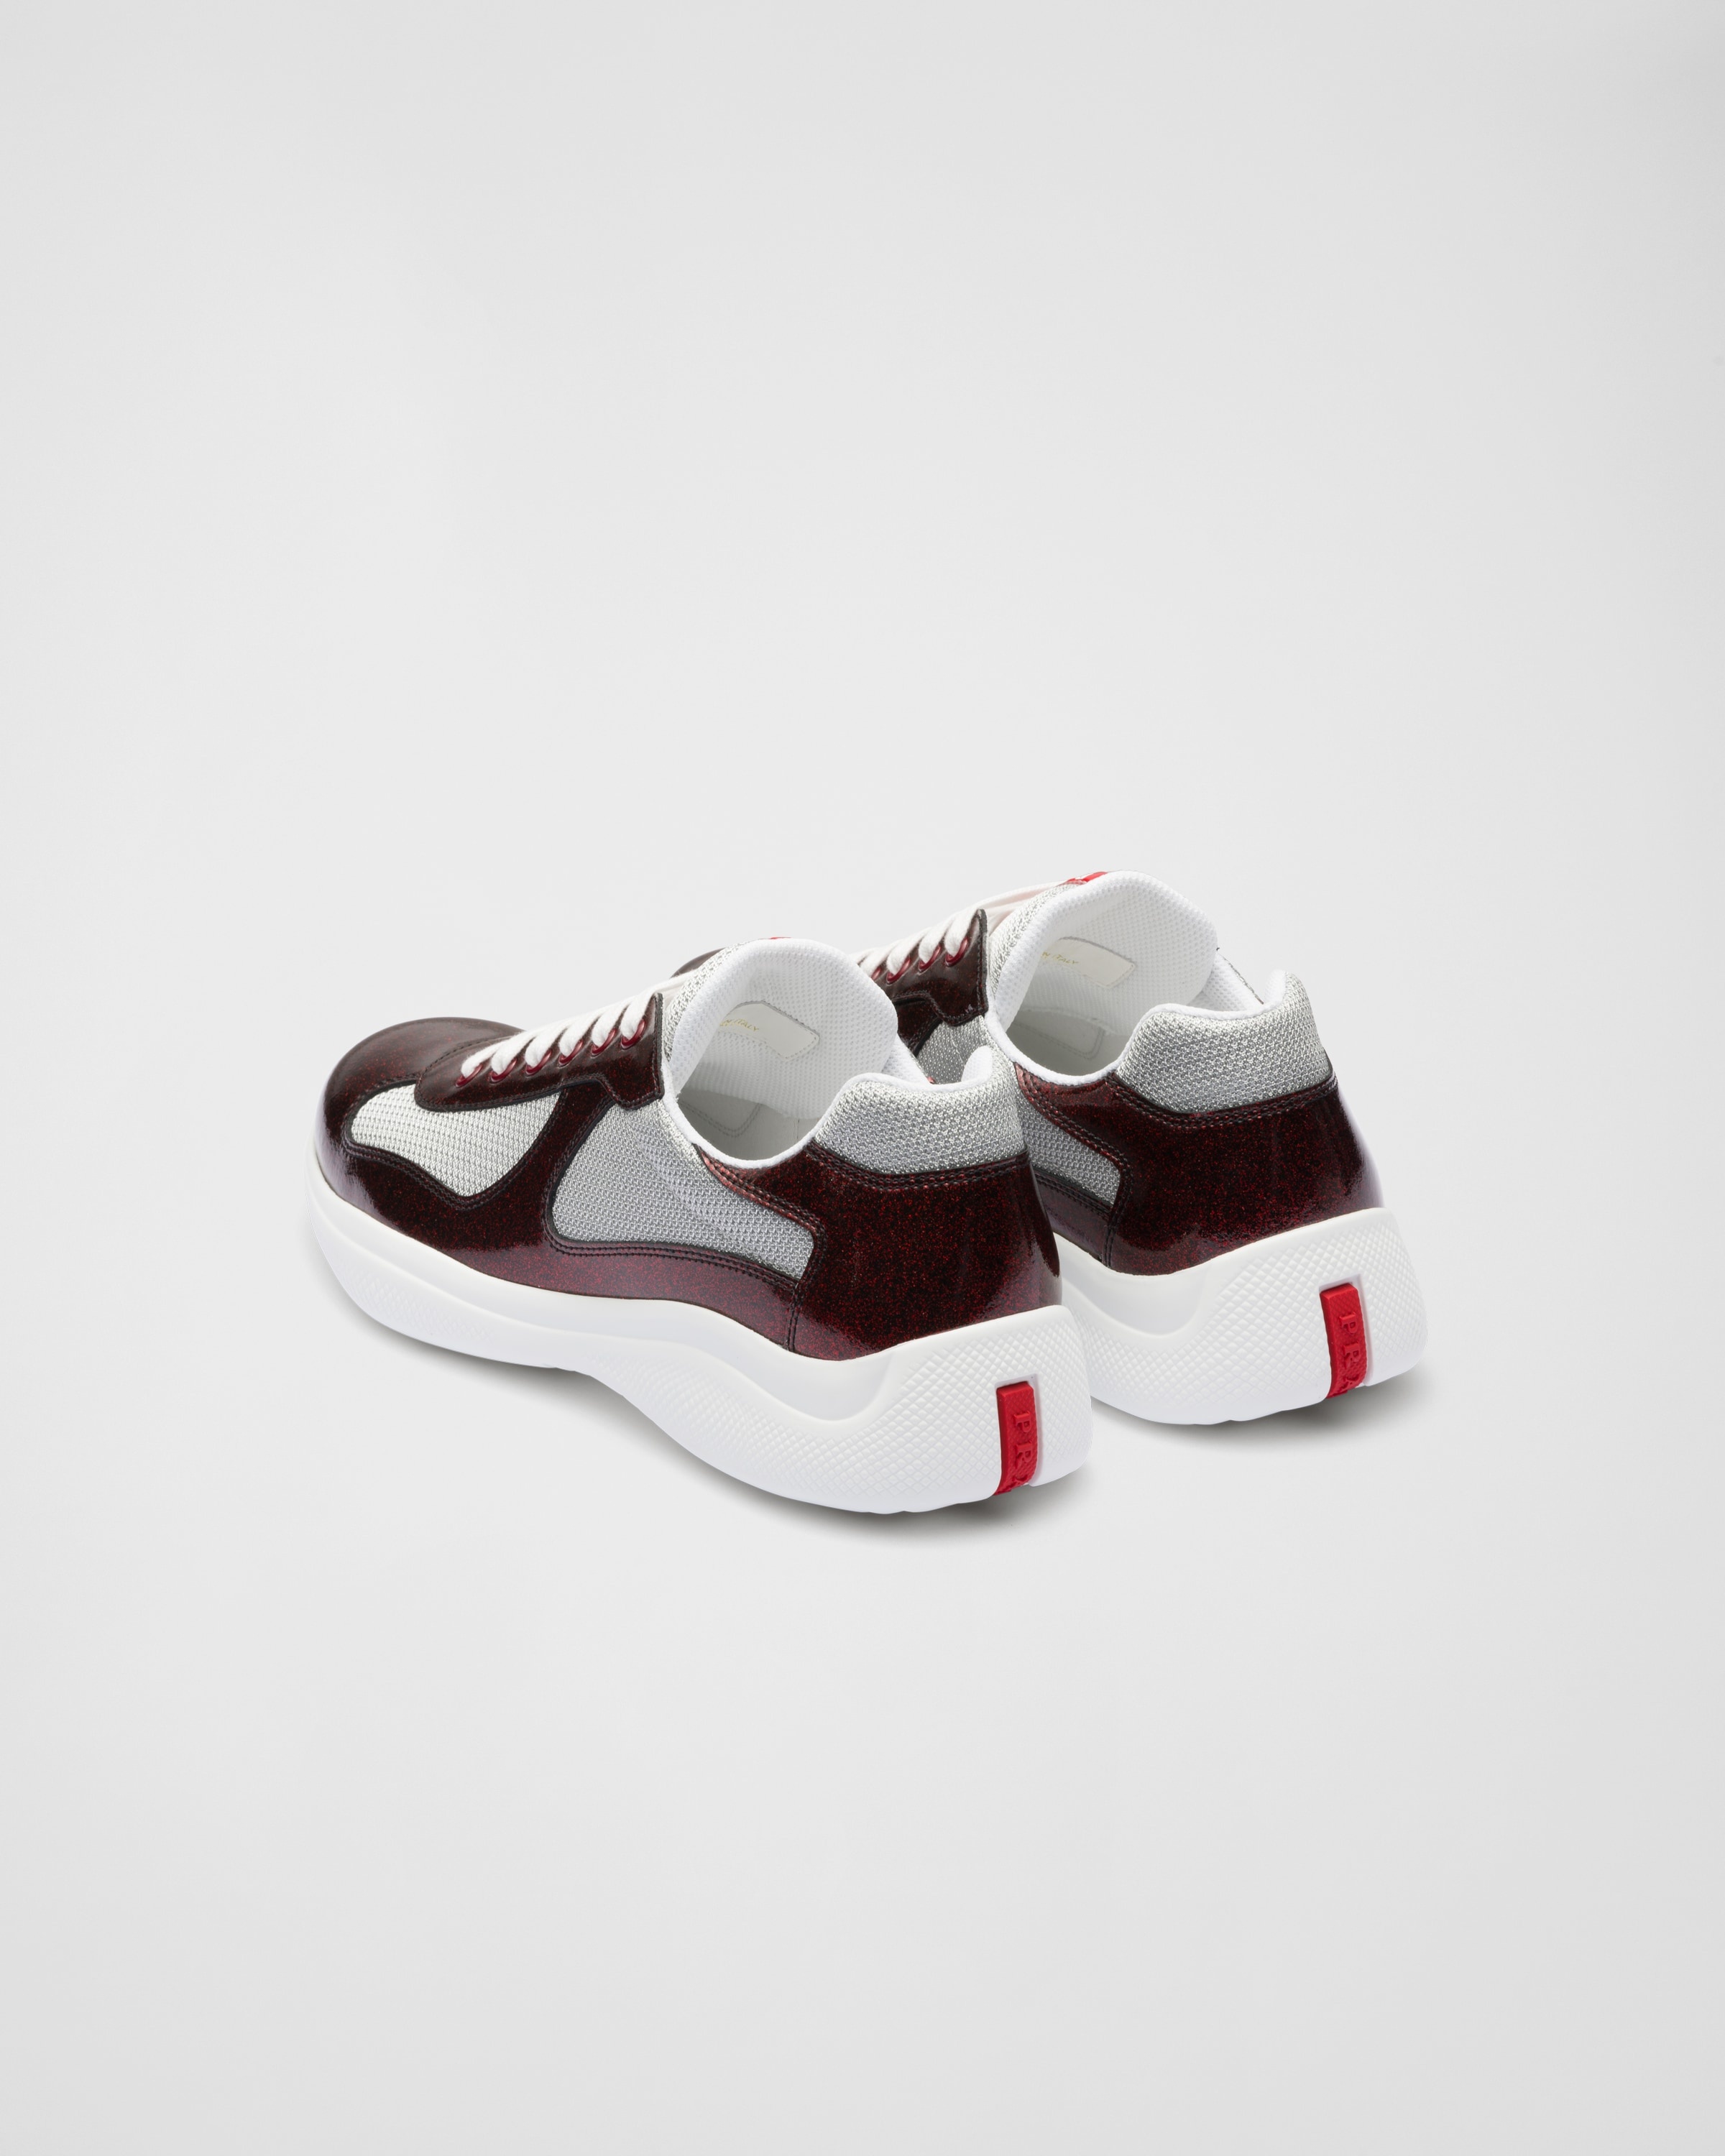 Prada America's Cup patent leather and bike fabric sneakers - 5